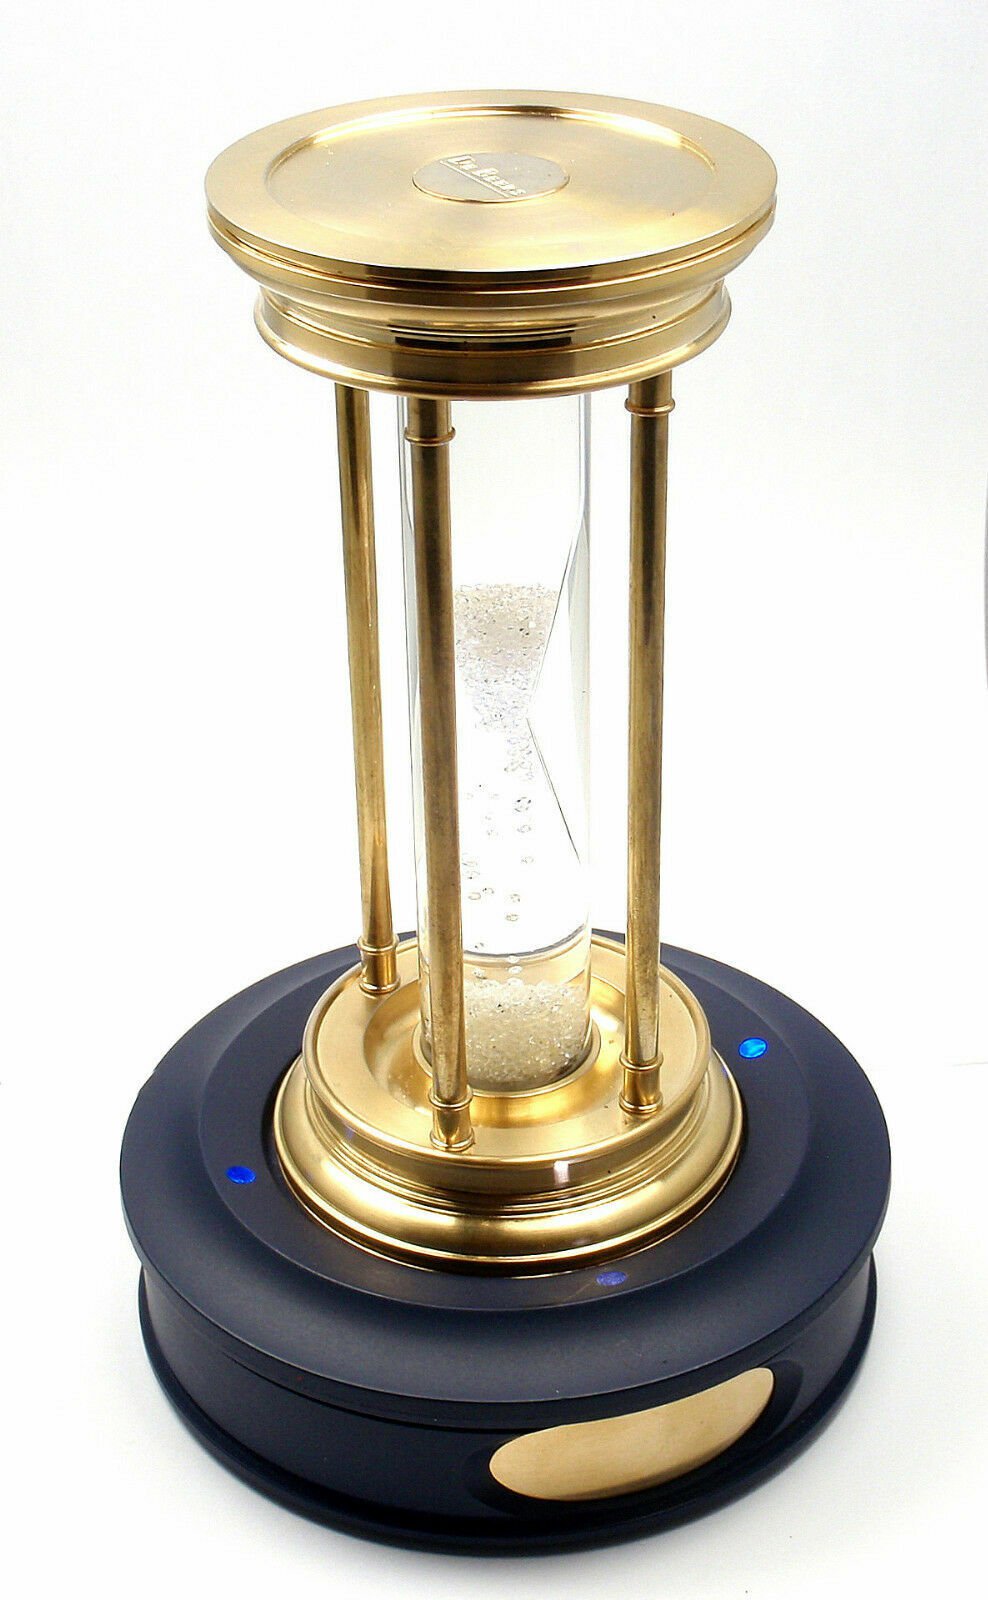 DeBeers Collectibles:Decorative Collectibles:Clocks:Other Clocks Very Rare! De Beers Limited Edition Millennium 2000 Diamond Brass Hourglass